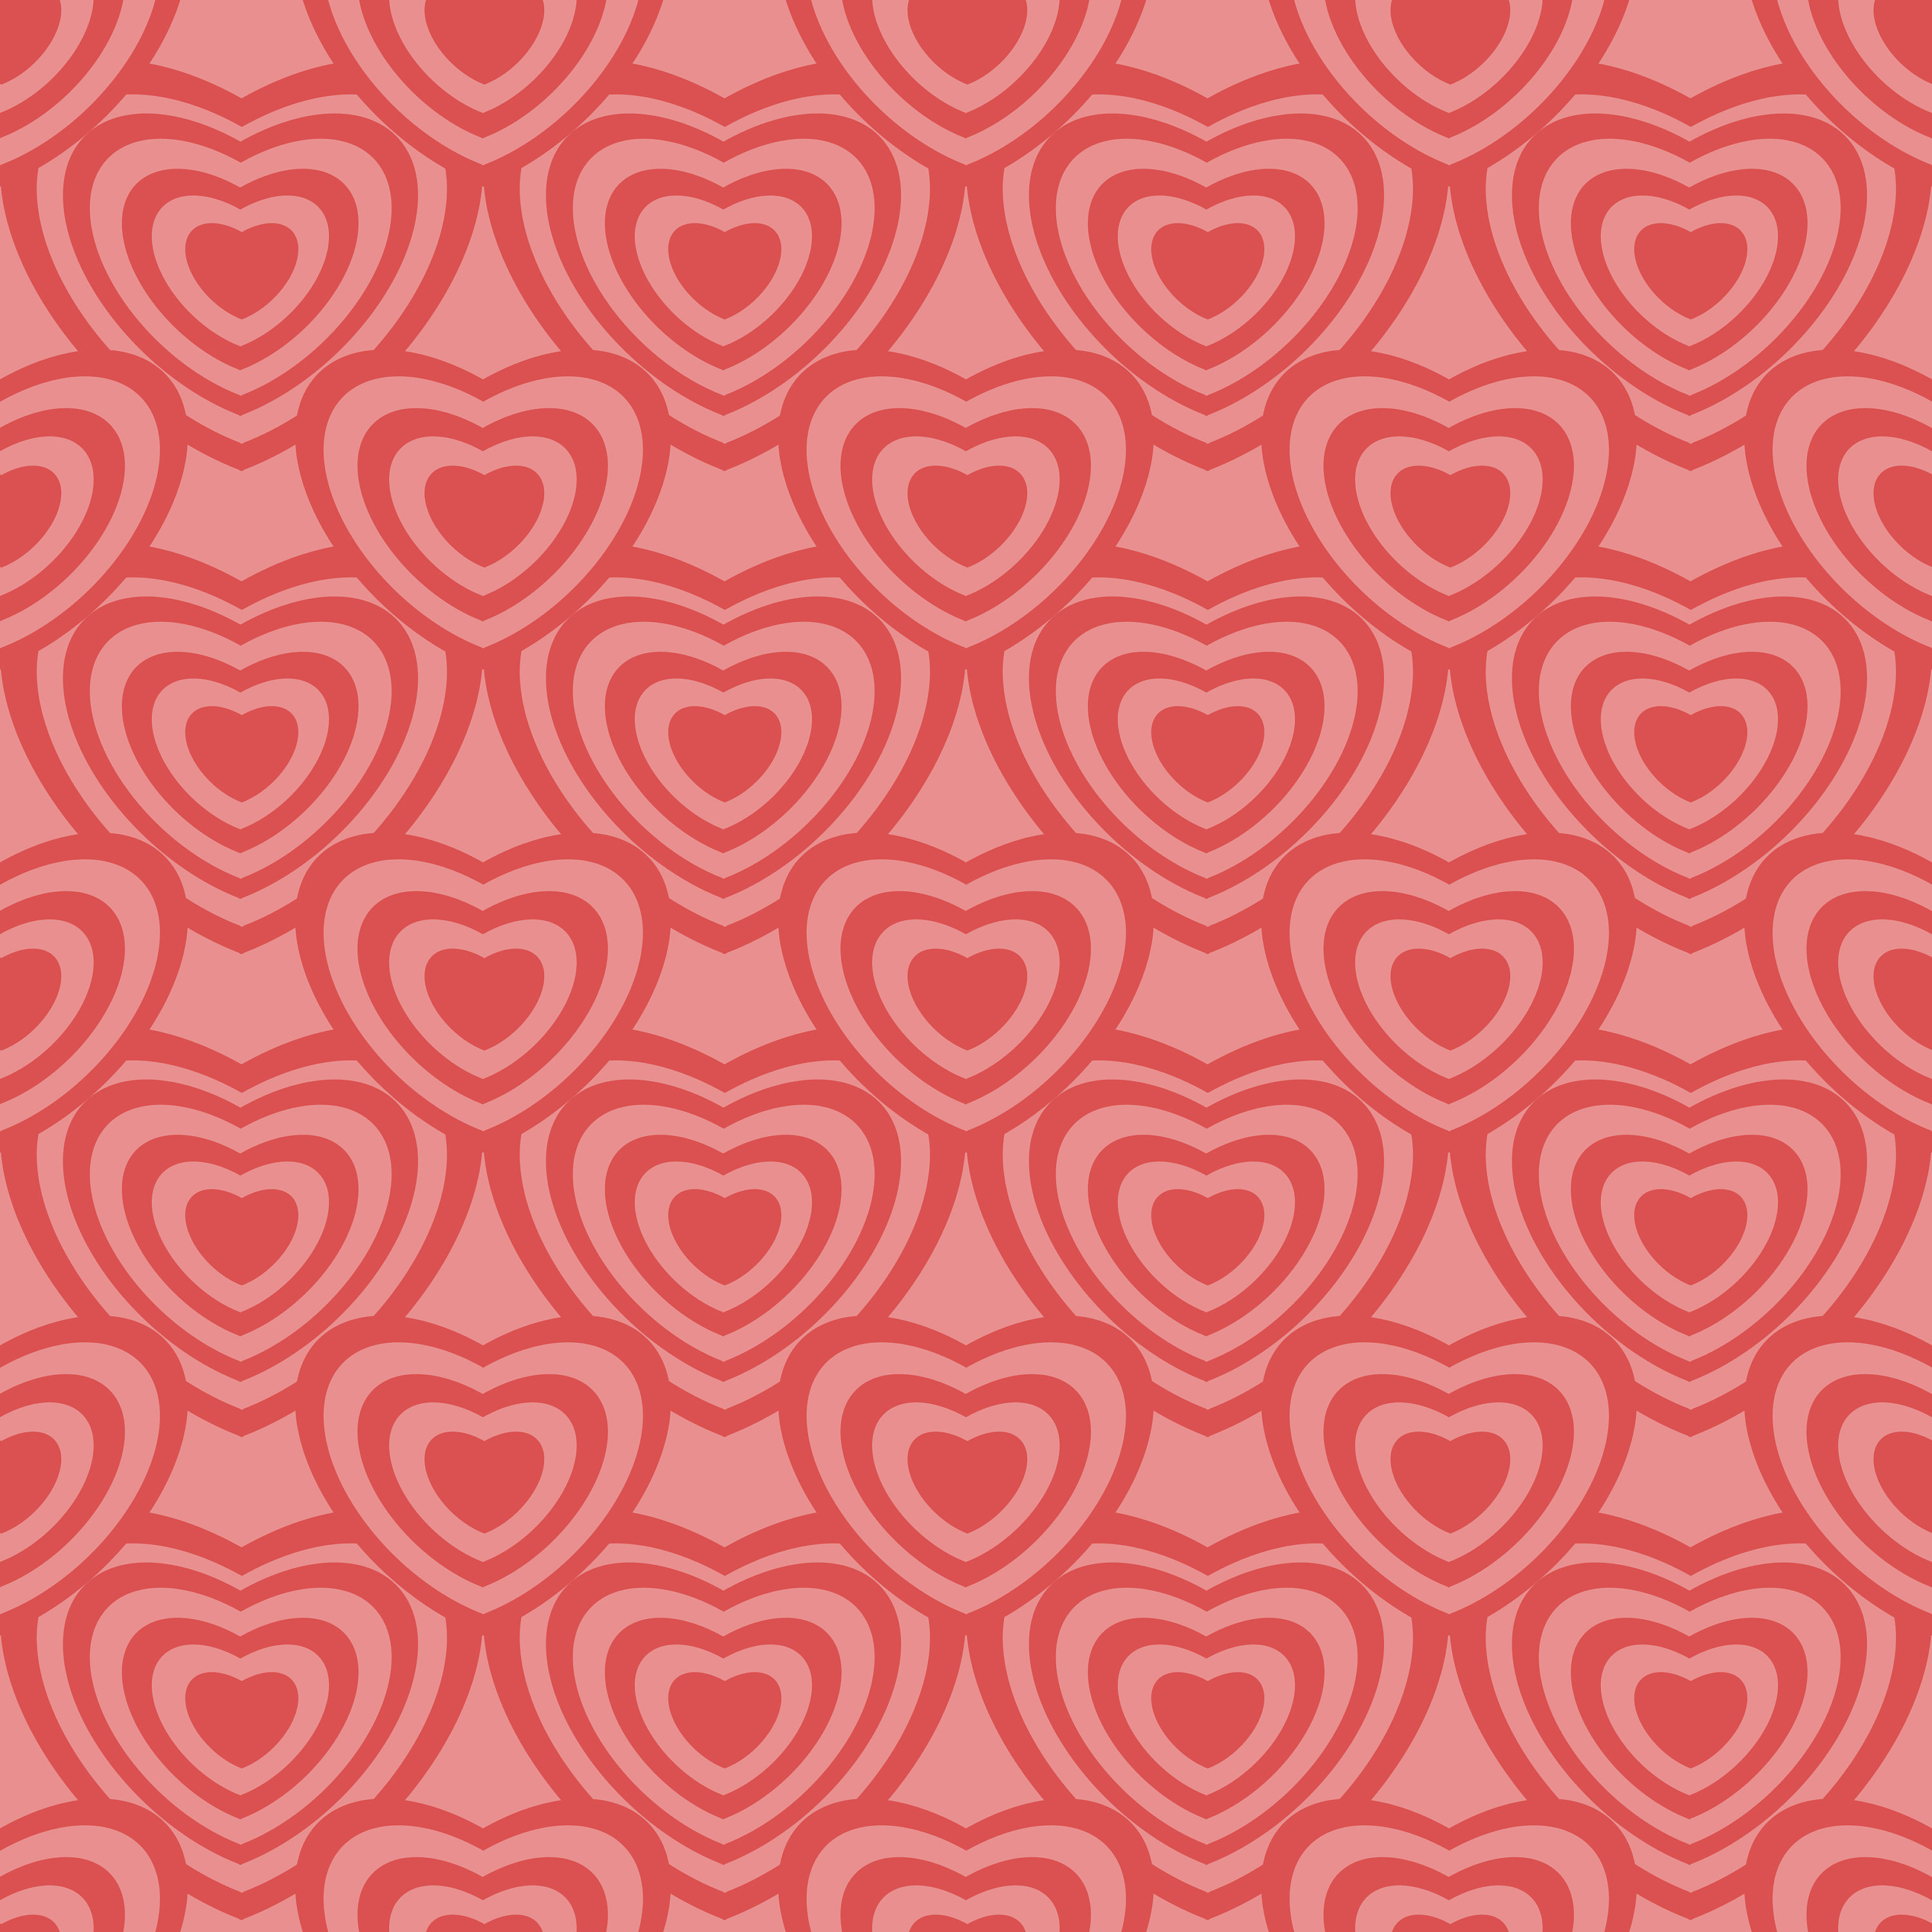 Y2k Heart 2000s Trend Red Valentines Hearts Seamless Repeat